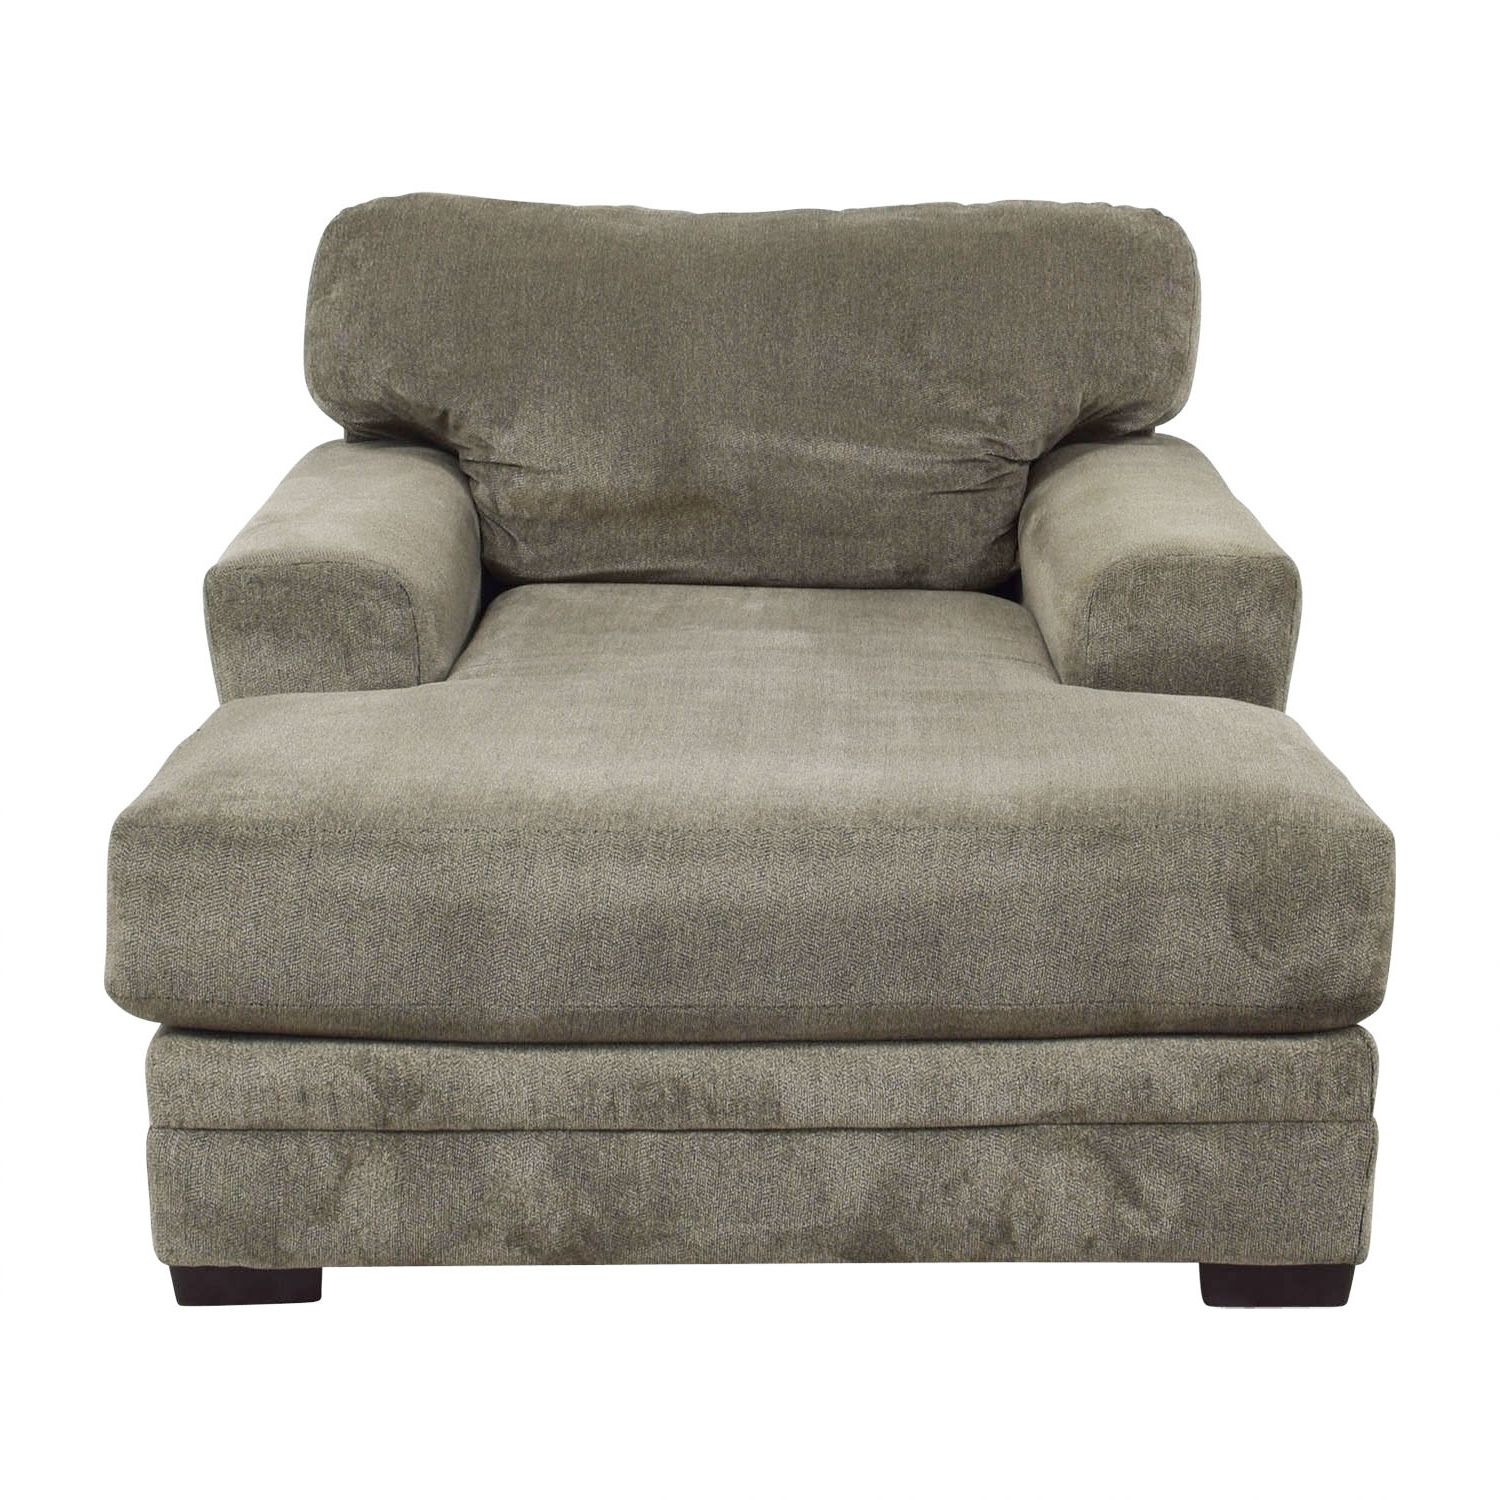 [%81% Off – Bob's Furniture Bob's Furniture Grey Chaise Lounge / Sofas Inside Fashionable Grey Chaises|grey Chaises With Regard To Current 81% Off – Bob's Furniture Bob's Furniture Grey Chaise Lounge / Sofas|most Recently Released Grey Chaises Regarding 81% Off – Bob's Furniture Bob's Furniture Grey Chaise Lounge / Sofas|famous 81% Off – Bob's Furniture Bob's Furniture Grey Chaise Lounge / Sofas With Grey Chaises%] (View 4 of 15)